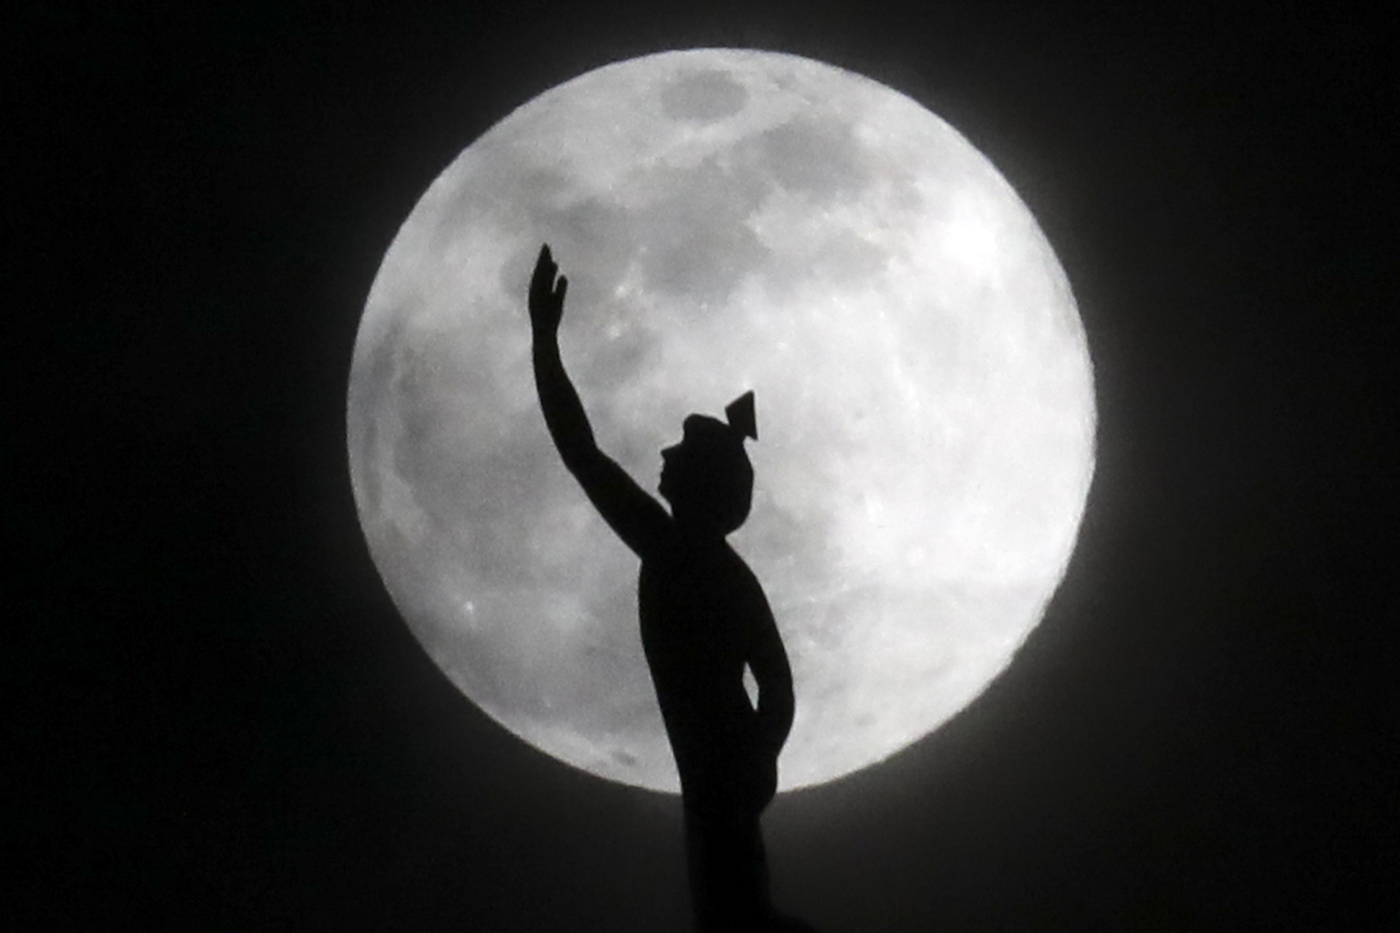 A supermoon rises behind a statue of the Roman god Mercury mounted on top of a hotel tower Tuesday, April 7, 2020, in Nashville, Tenn. (AP Photo/Mark Humphrey)